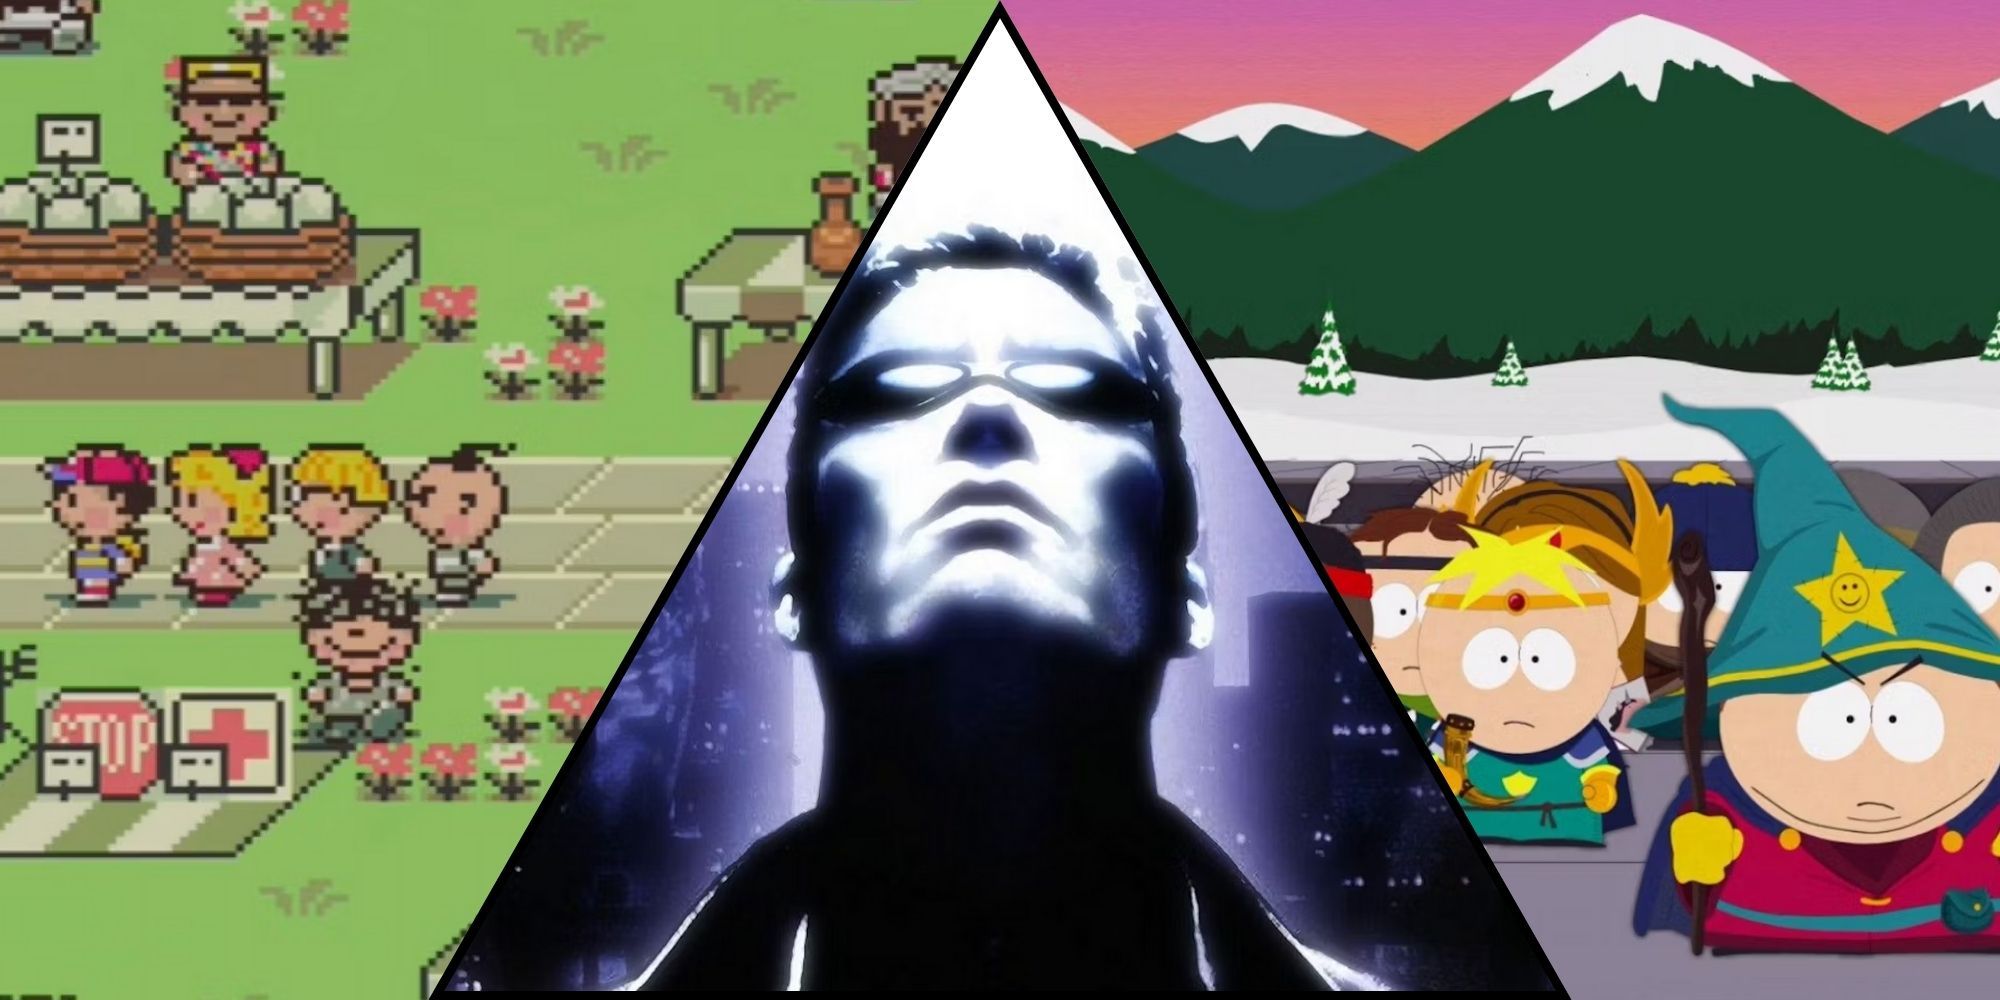 Earthbound DeusEx and South Park